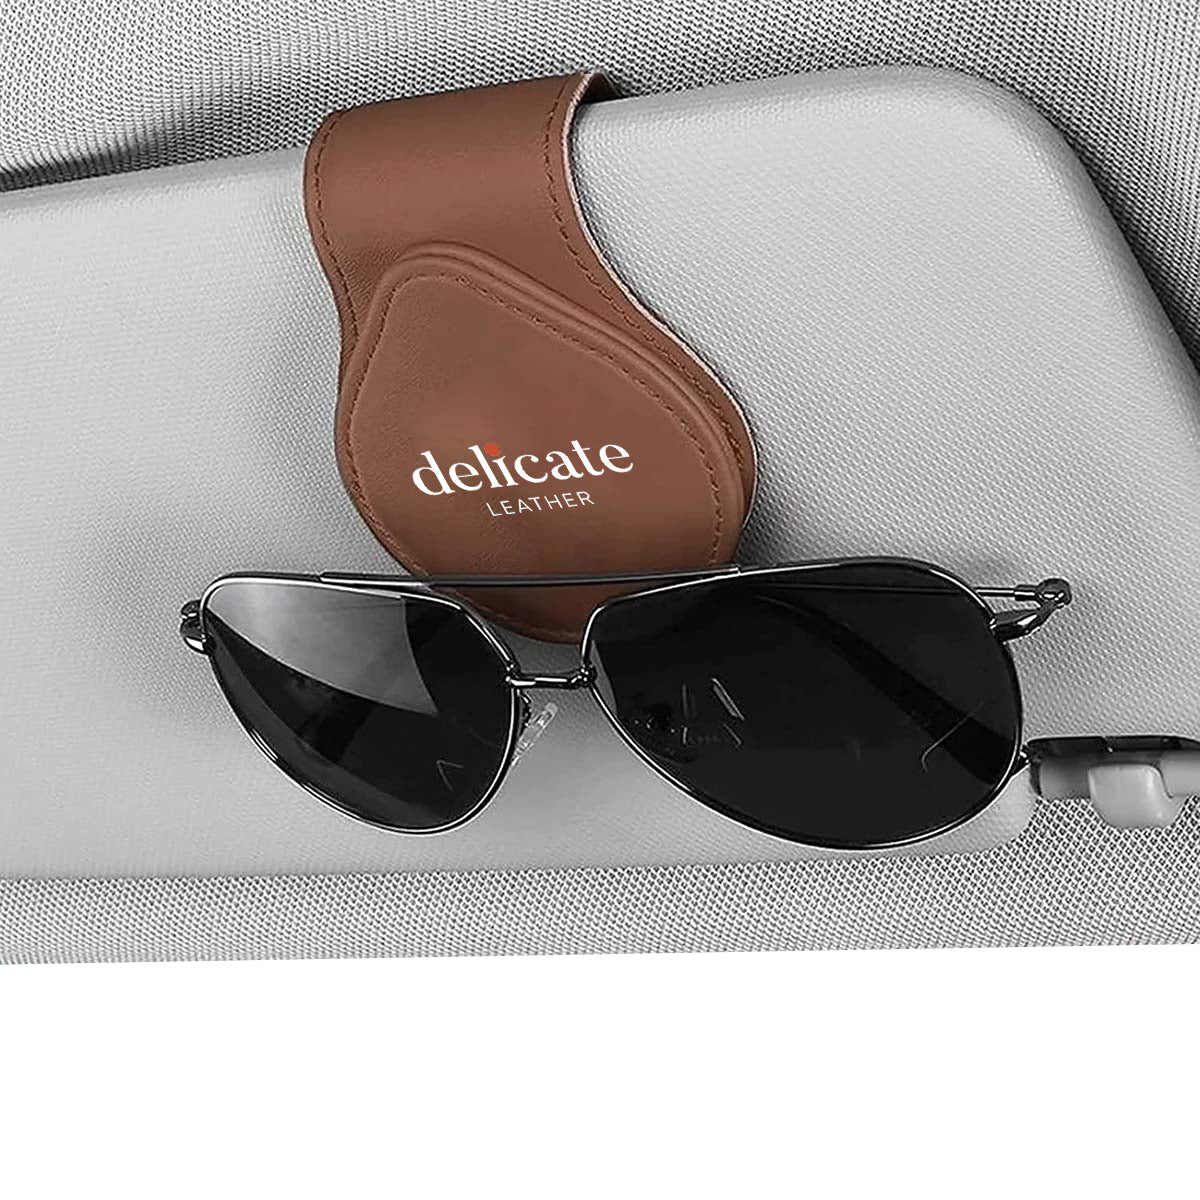 Car Sunglasses Holder, Custom For Your Cars, Magnetic Leather Glasses Frame 2023 Update LI13995 - Delicate Leather